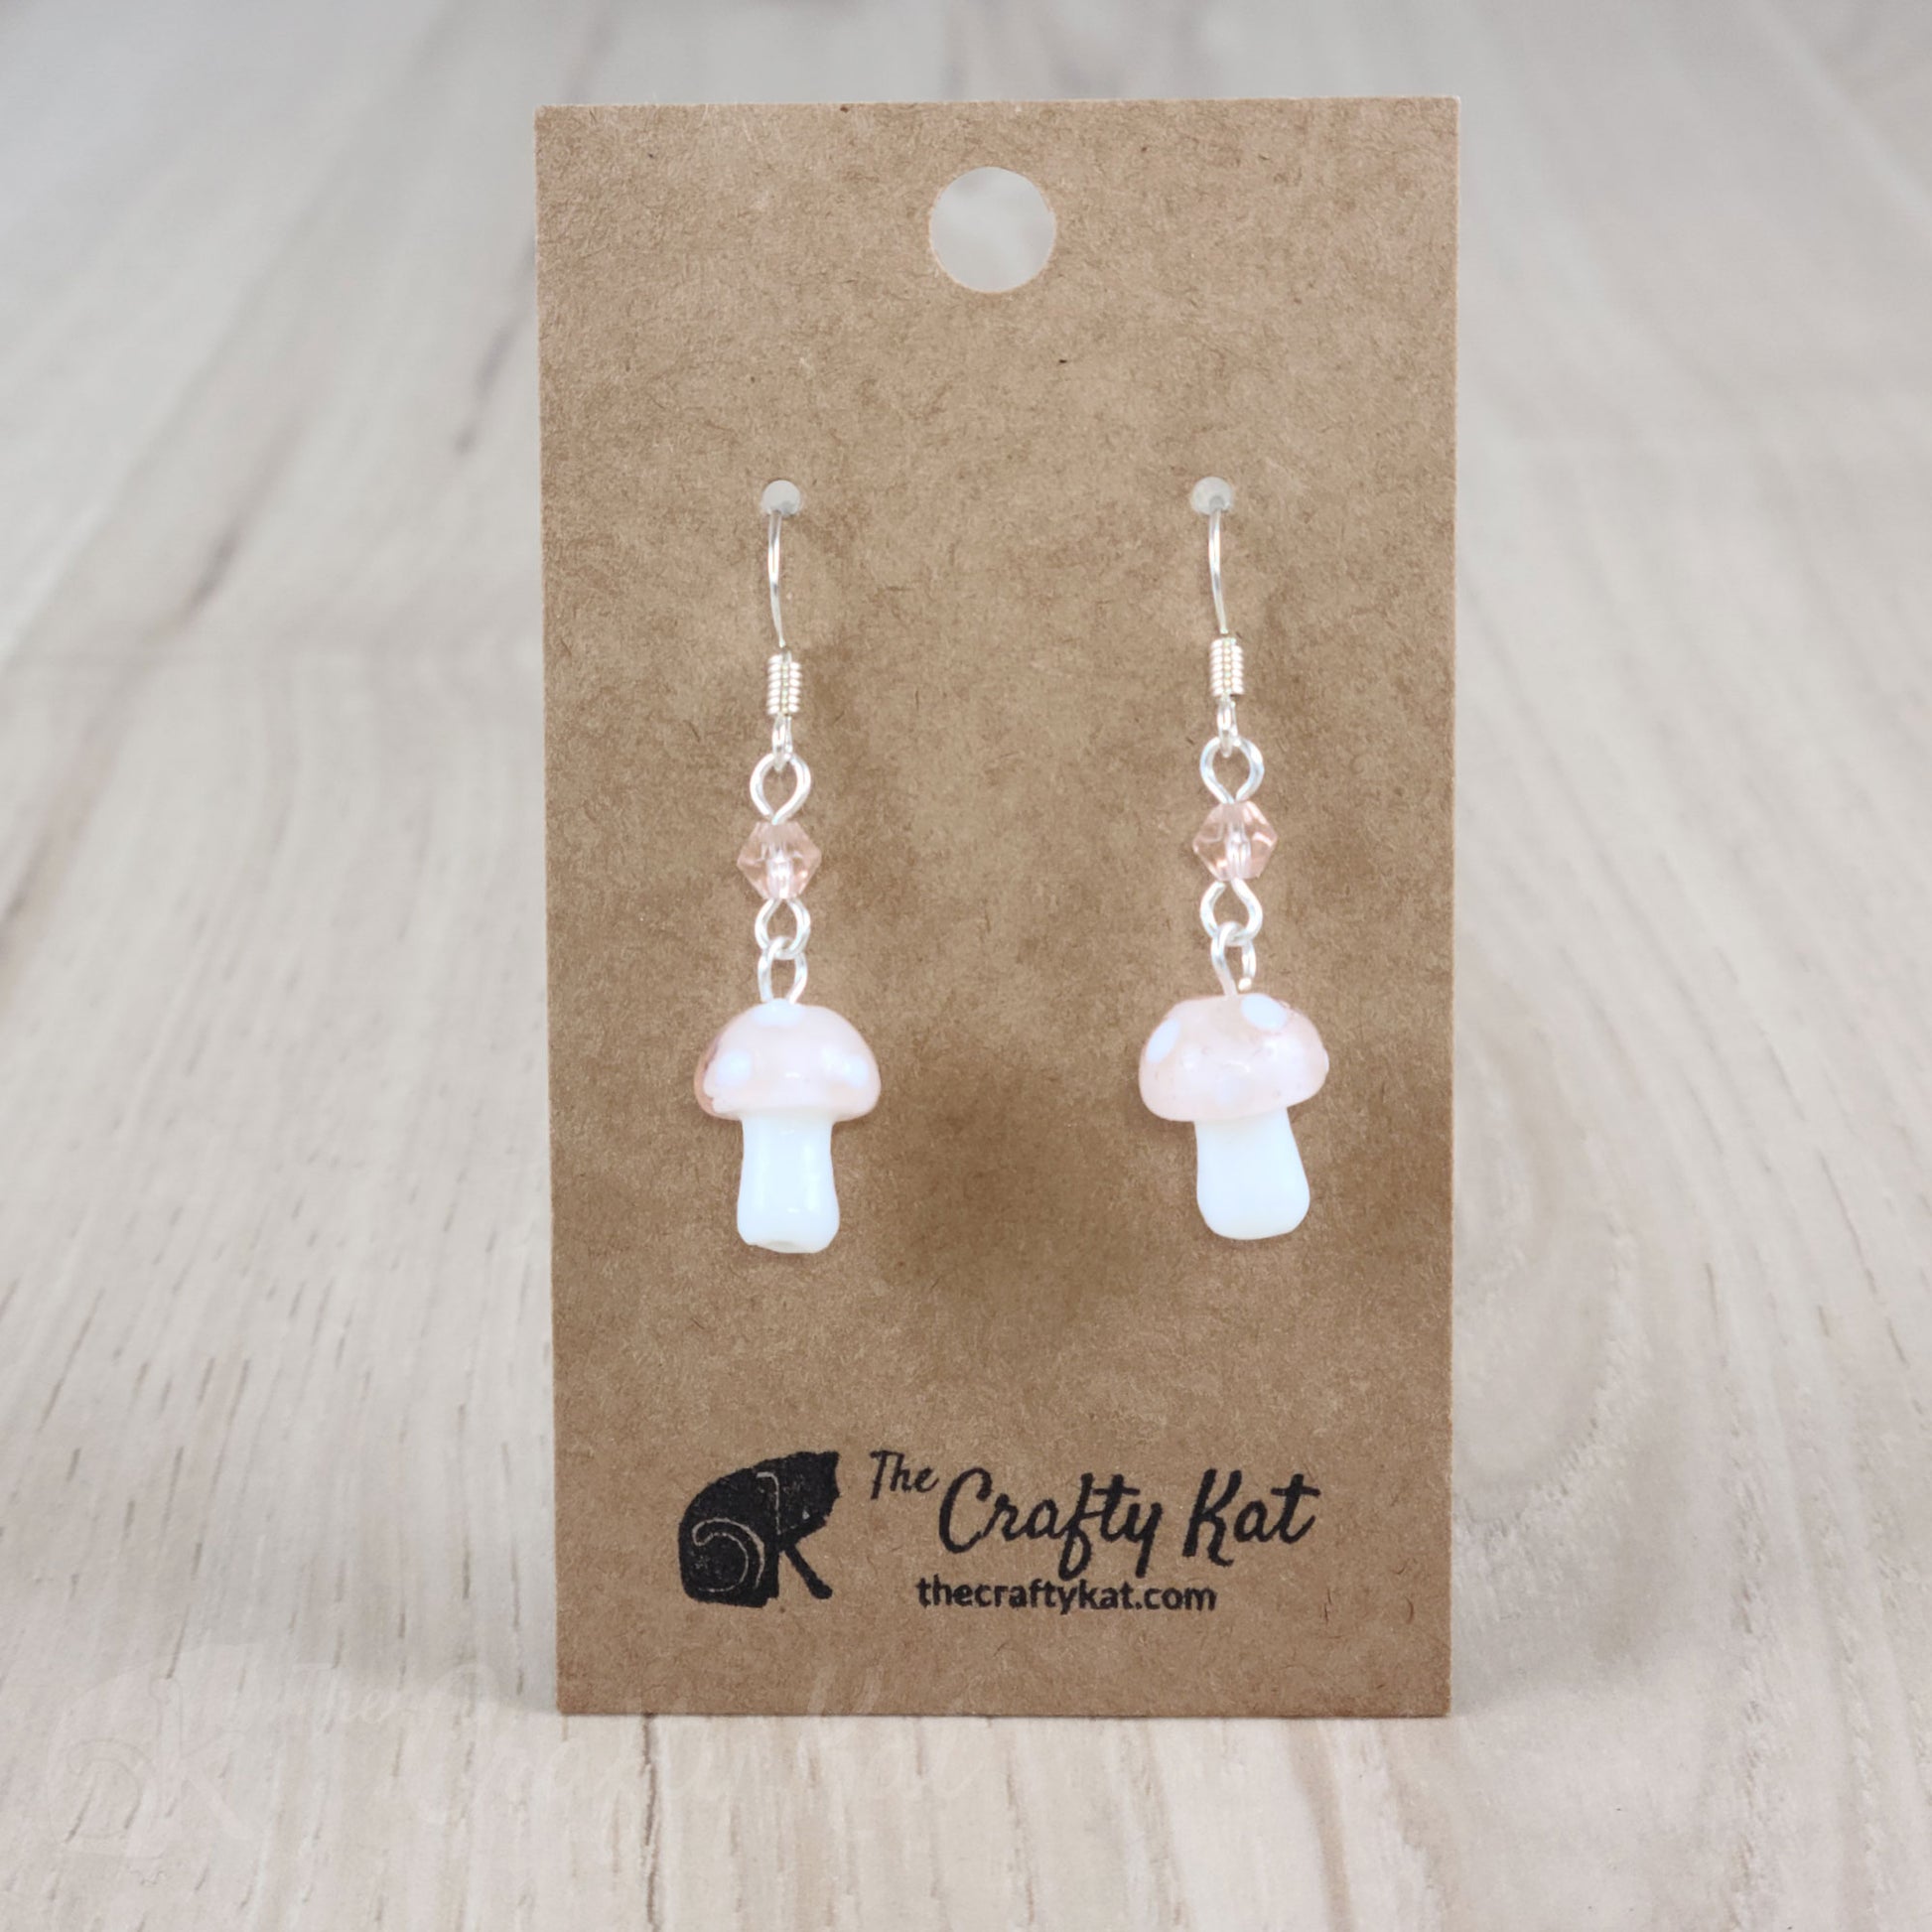 Mushroom-shaped tiered earrings made of lampwork and pressed glass beads with silver-plated base metal fittings. These mushrooms are blush pink with white spots.